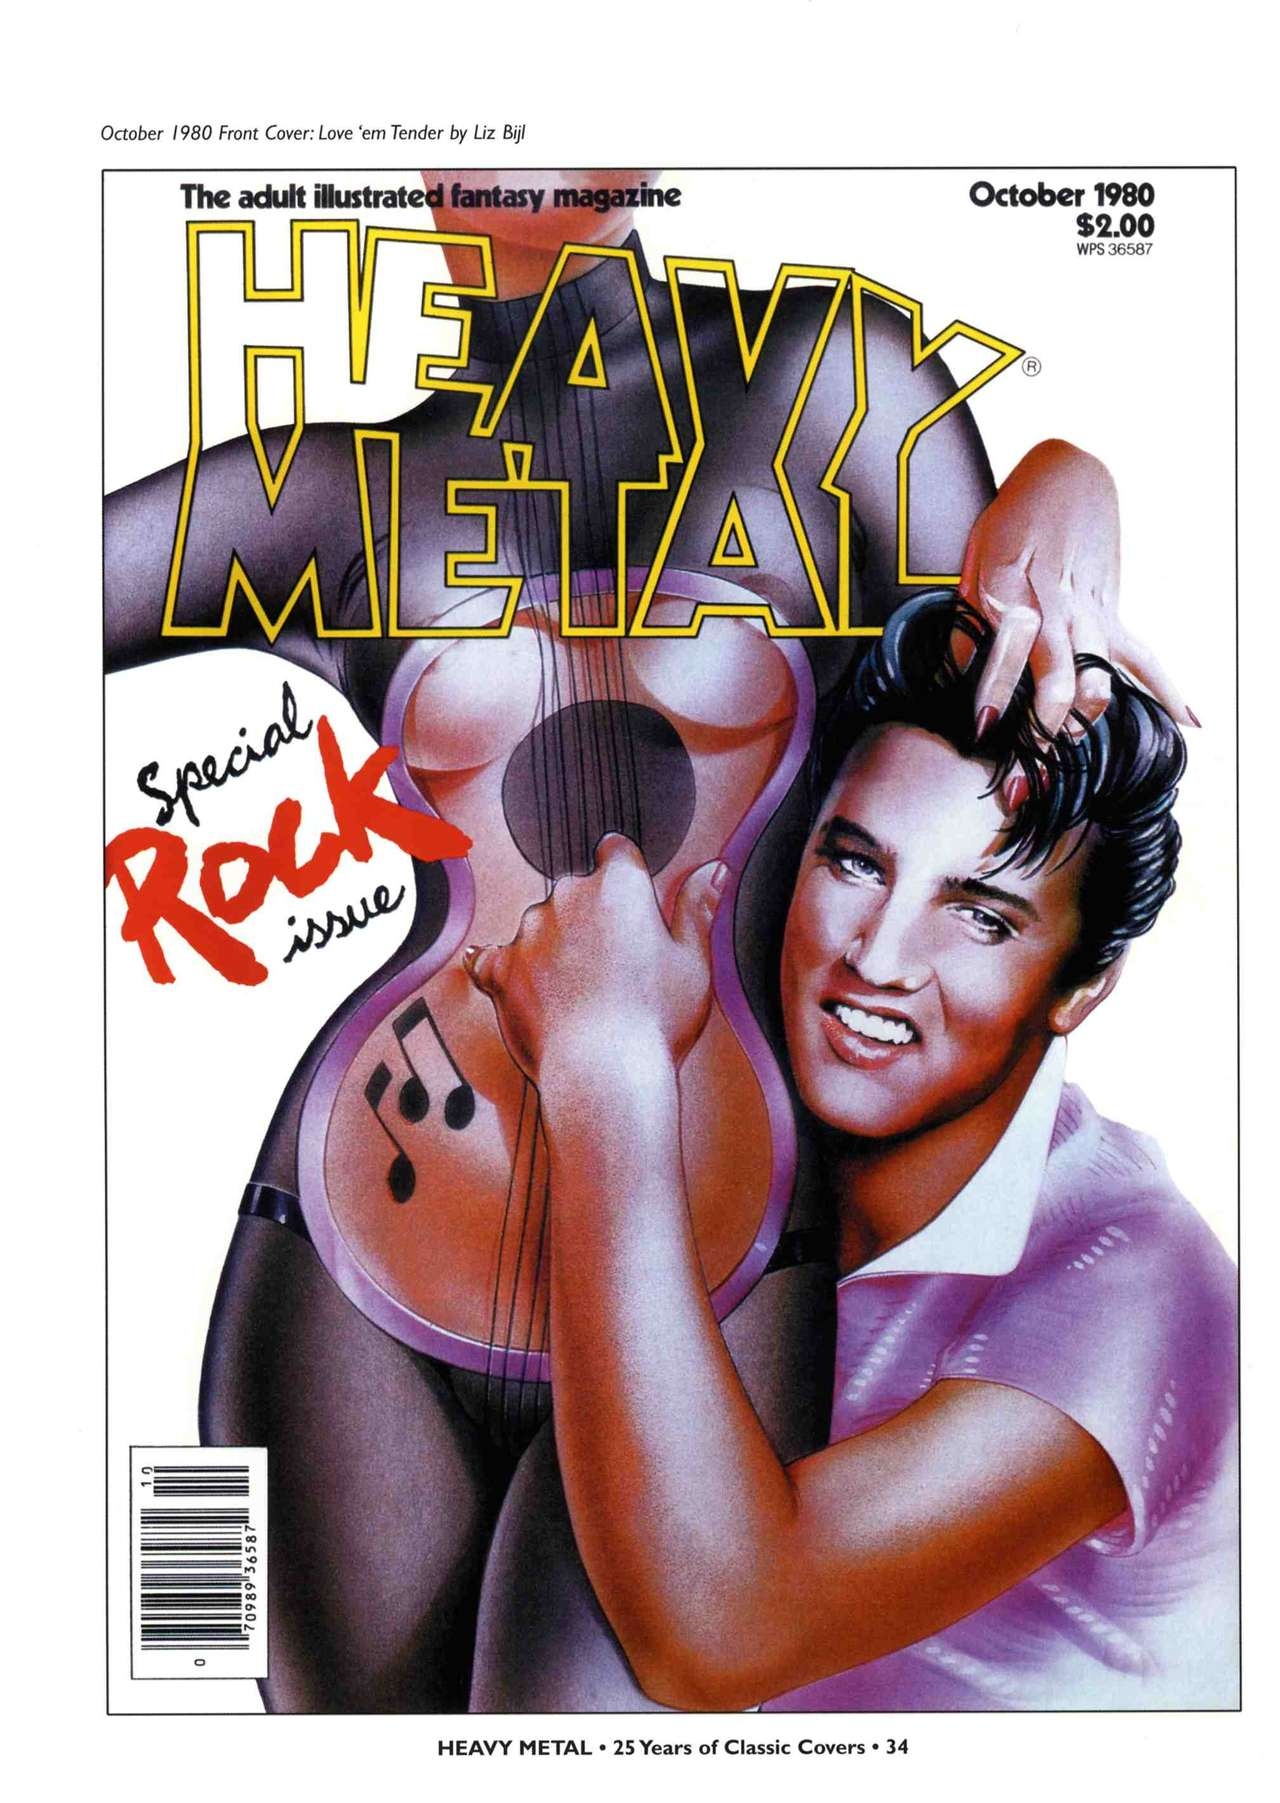 HEAVY METAL 25 Years of Classic Covers 39